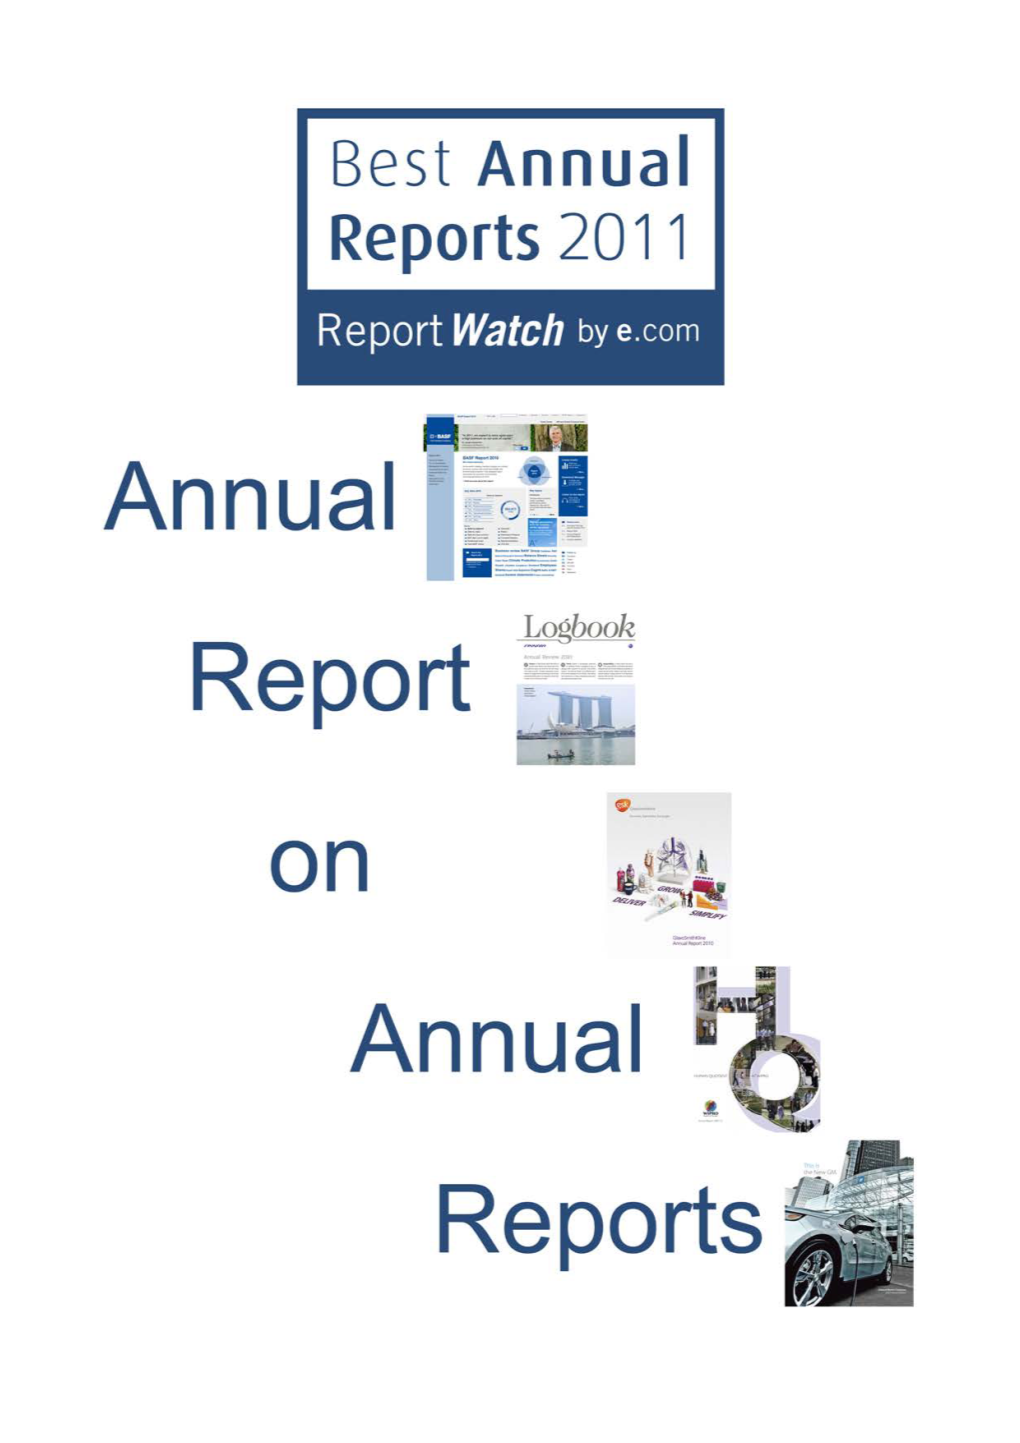 Annual Report on Annual Reports 2011